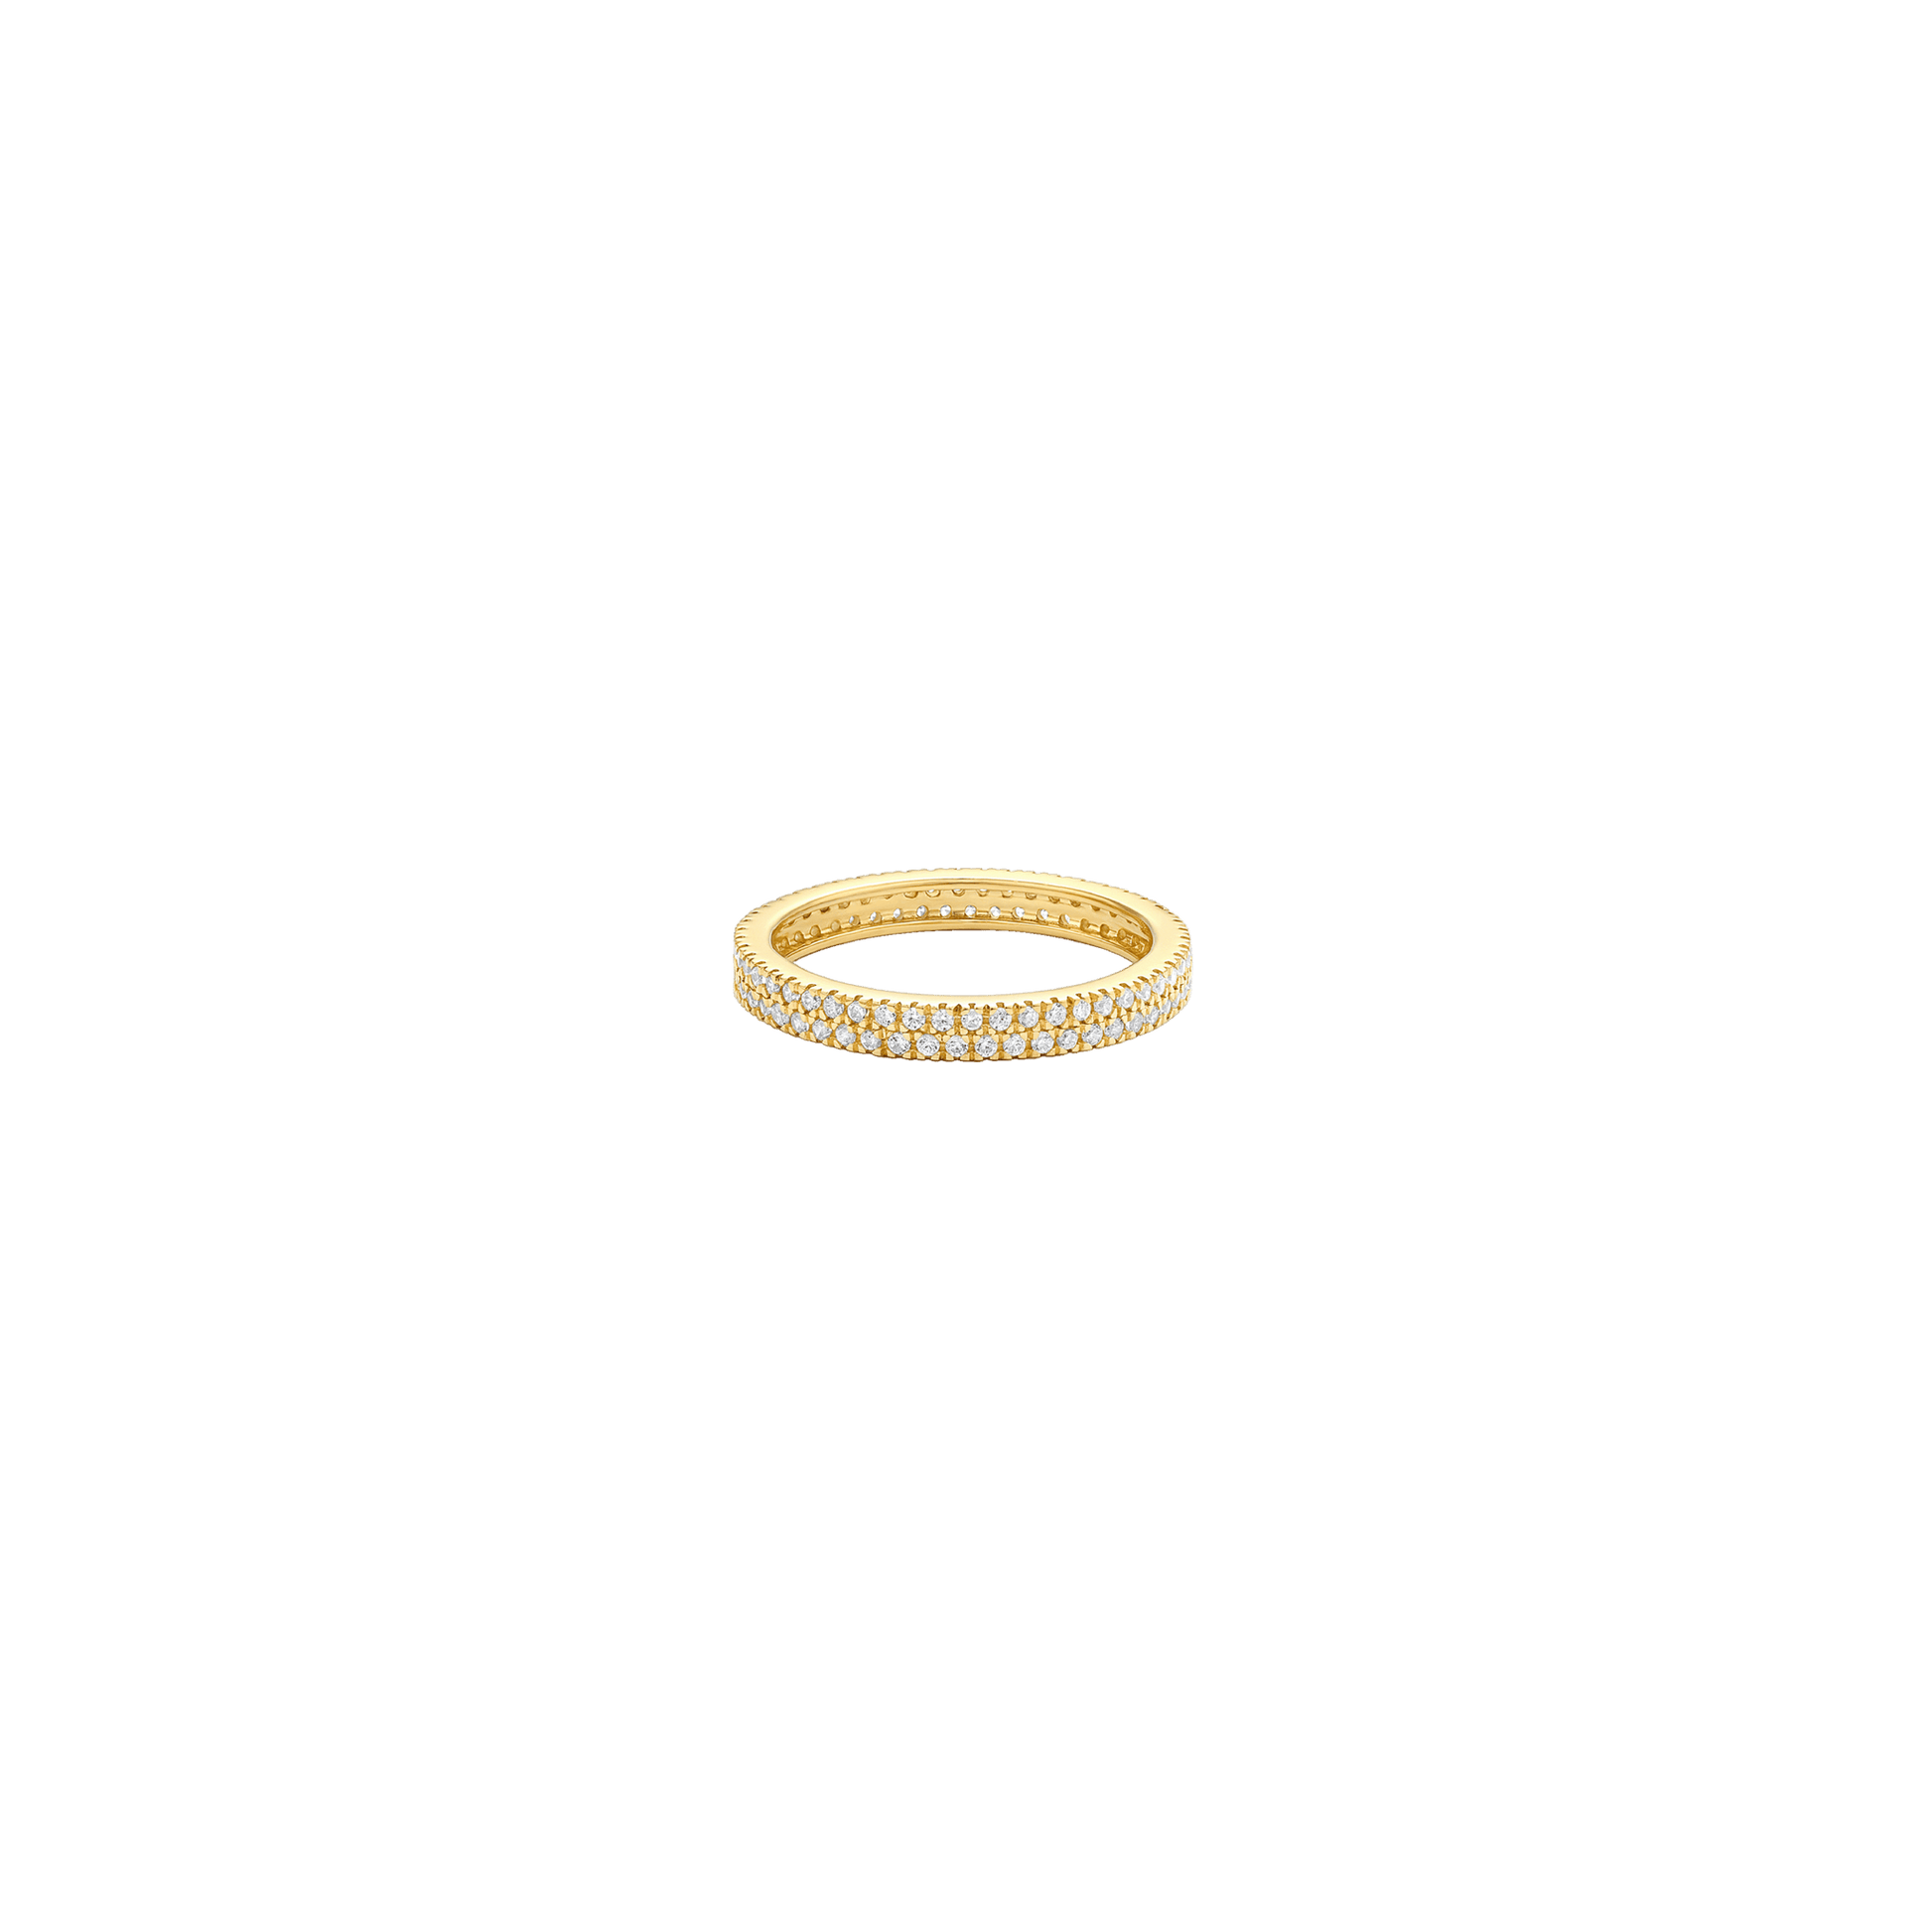 Diamond Eternity Band - 14K Yellow Gold Rings 14K Solid Gold US 4 